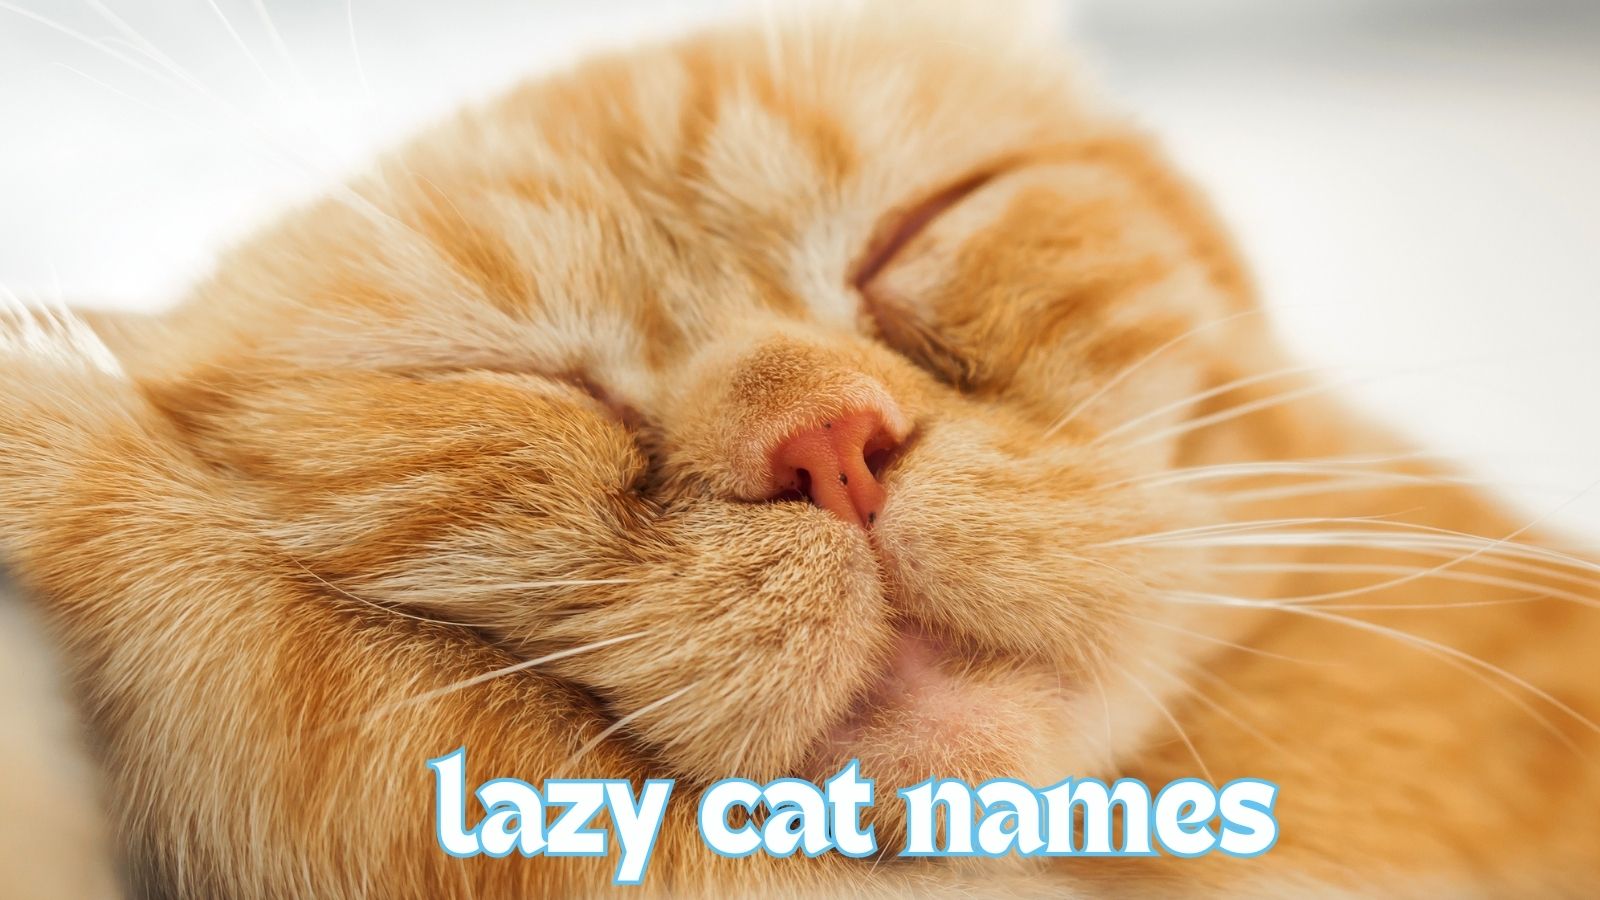 featured lazy cat names